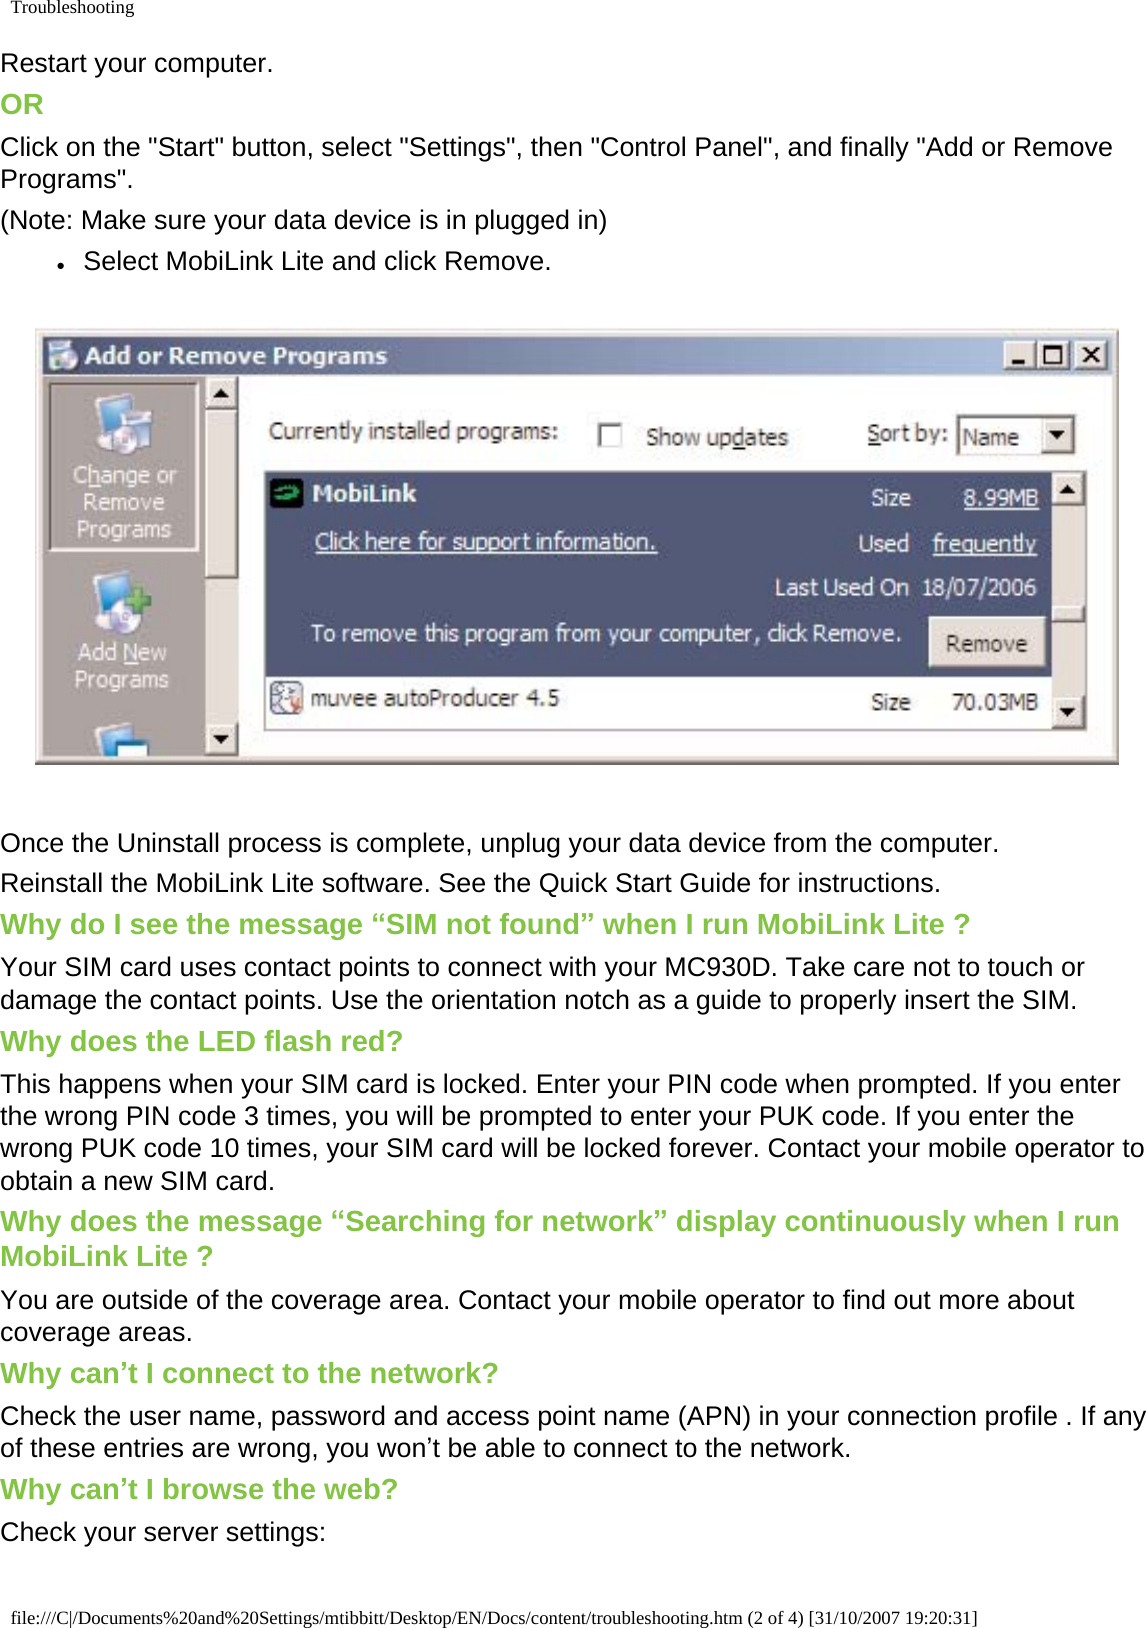 TroubleshootingRestart your computer.ORClick on the &quot;Start&quot; button, select &quot;Settings&quot;, then &quot;Control Panel&quot;, and finally &quot;Add or Remove Programs&quot;.(Note: Make sure your data device is in plugged in)●     Select MobiLink Lite and click Remove. Once the Uninstall process is complete, unplug your data device from the computer.Reinstall the MobiLink Lite software. See the Quick Start Guide for instructions. Why do I see the message “SIM not found” when I run MobiLink Lite ?Your SIM card uses contact points to connect with your MC930D. Take care not to touch or damage the contact points. Use the orientation notch as a guide to properly insert the SIM.Why does the LED flash red?This happens when your SIM card is locked. Enter your PIN code when prompted. If you enter the wrong PIN code 3 times, you will be prompted to enter your PUK code. If you enter the wrong PUK code 10 times, your SIM card will be locked forever. Contact your mobile operator to obtain a new SIM card. Why does the message “Searching for network” display continuously when I run MobiLink Lite ?You are outside of the coverage area. Contact your mobile operator to find out more about coverage areas.Why can’t I connect to the network?Check the user name, password and access point name (APN) in your connection profile . If any of these entries are wrong, you won’t be able to connect to the network.Why can’t I browse the web?Check your server settings:file:///C|/Documents%20and%20Settings/mtibbitt/Desktop/EN/Docs/content/troubleshooting.htm (2 of 4) [31/10/2007 19:20:31]